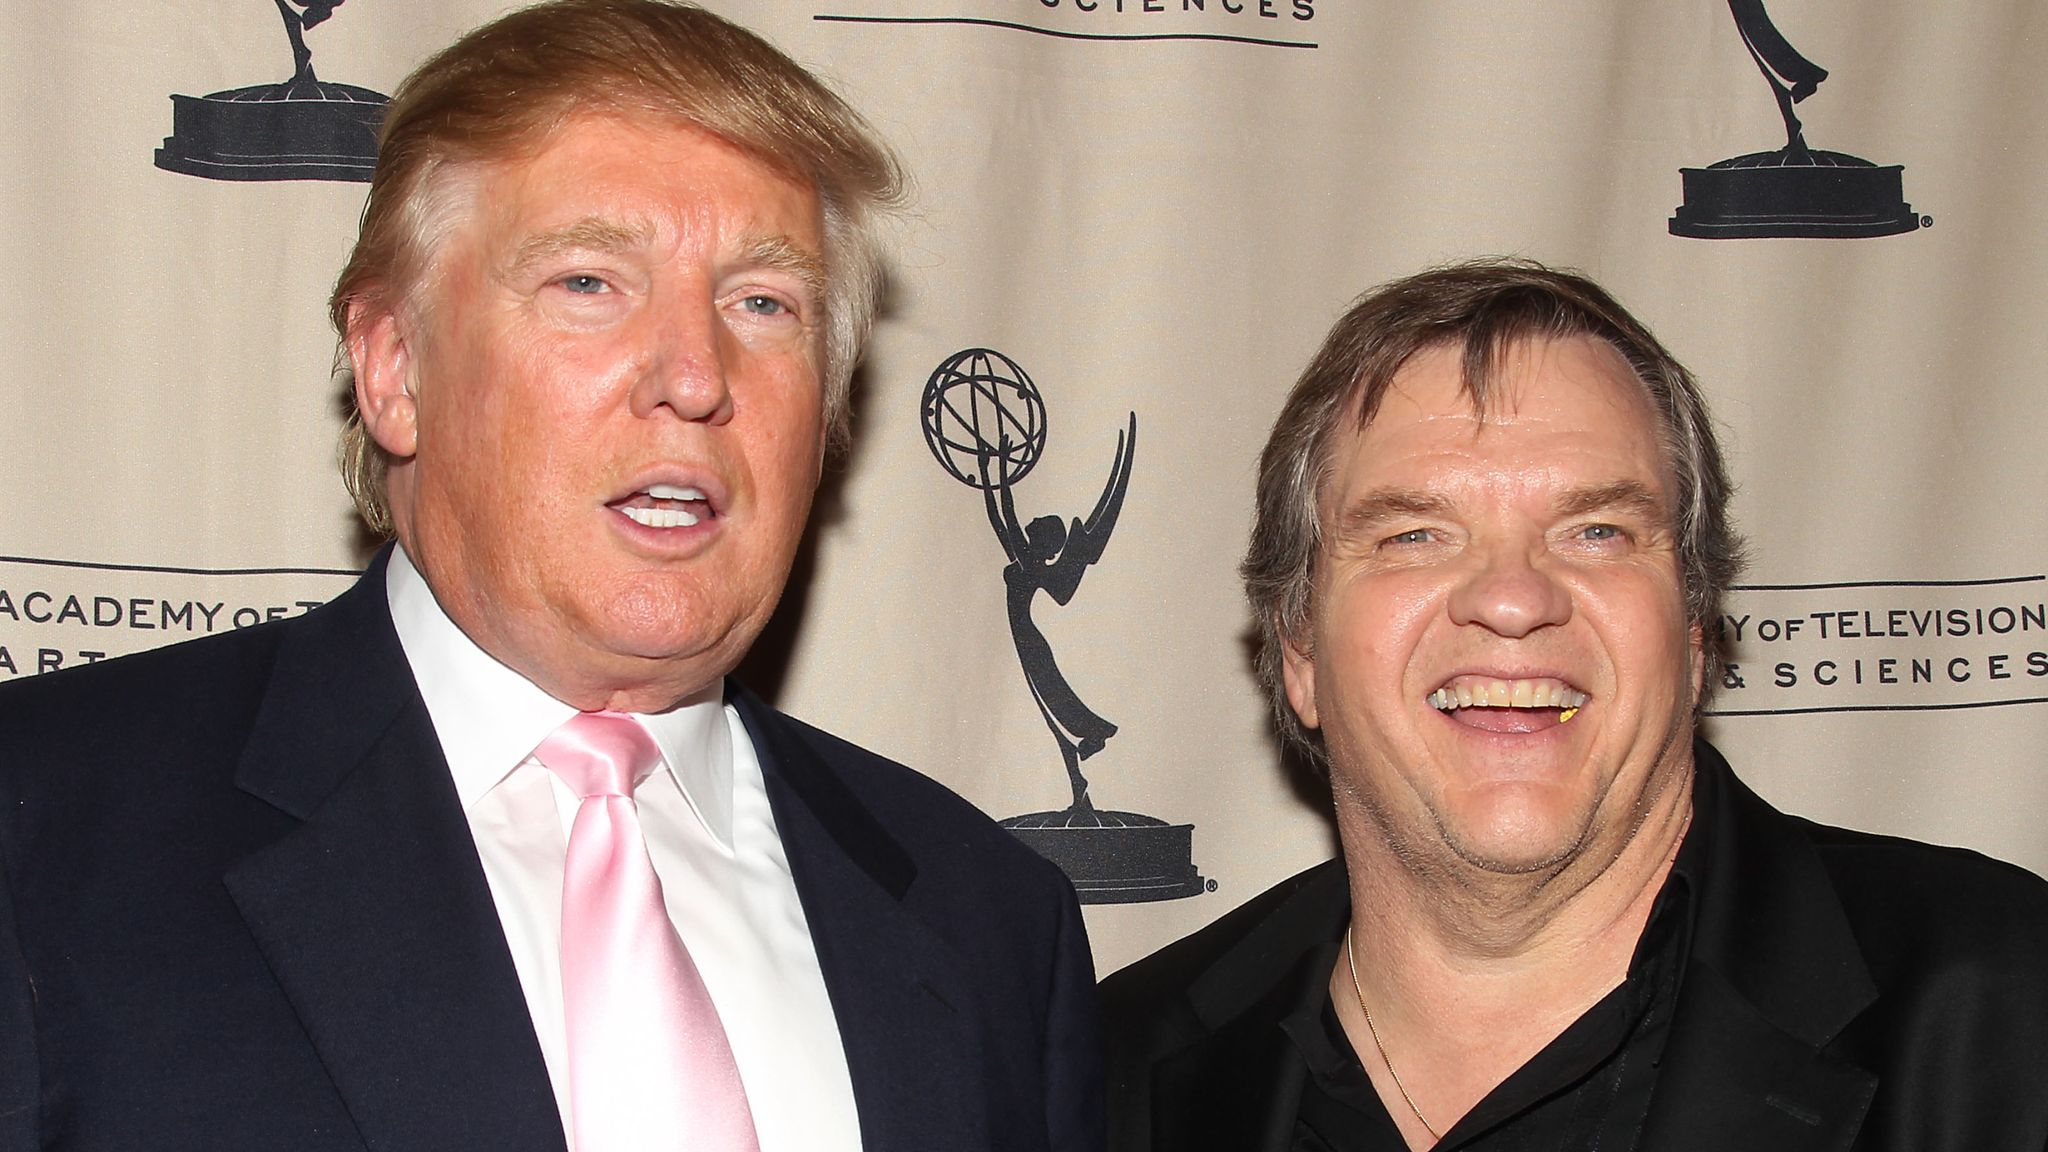 Donald Trump and Meat Loaf in 2011. Pic: Dave Allocca/Starpix/Shutterstock